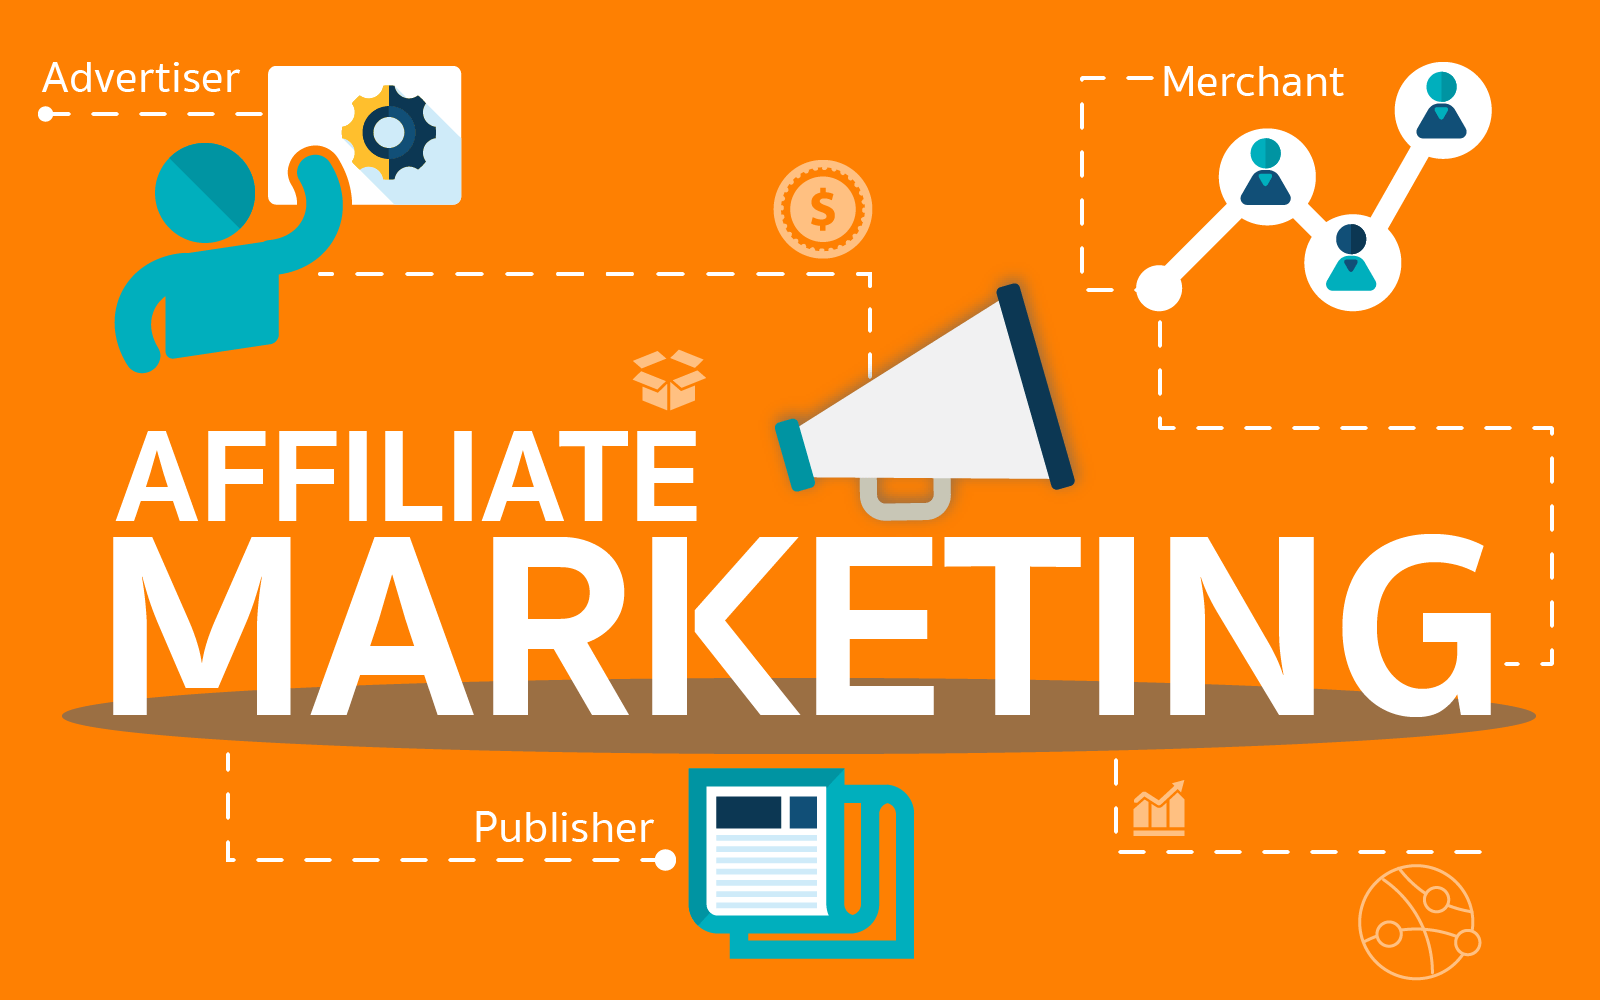 Is There A Detrimental Facet To Affiliate Marketing?